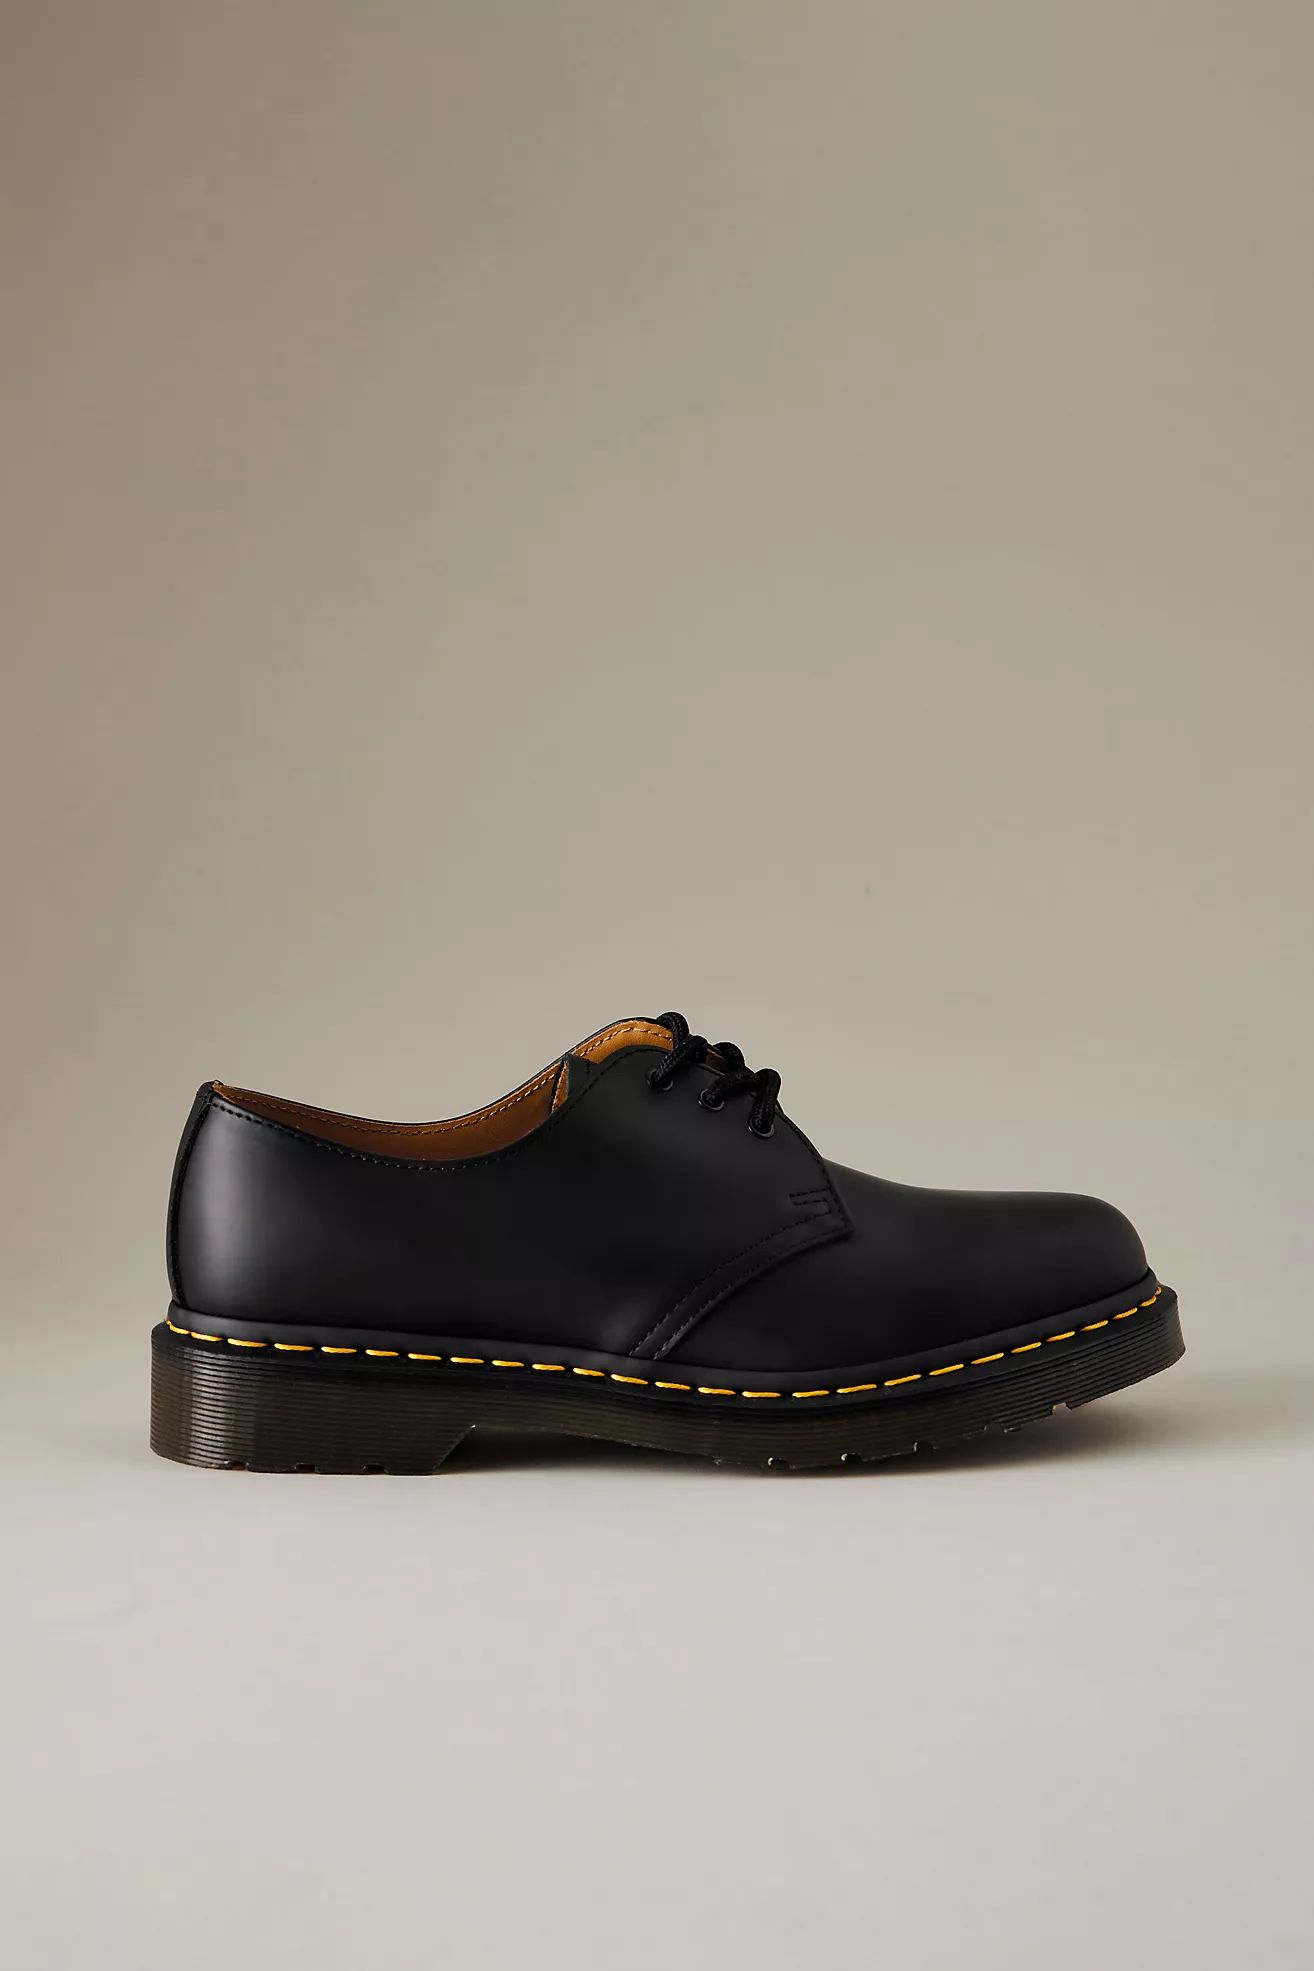 Dr. Martens 1461 Smooth Leather Oxford Shoes | Anthropologie (UK)